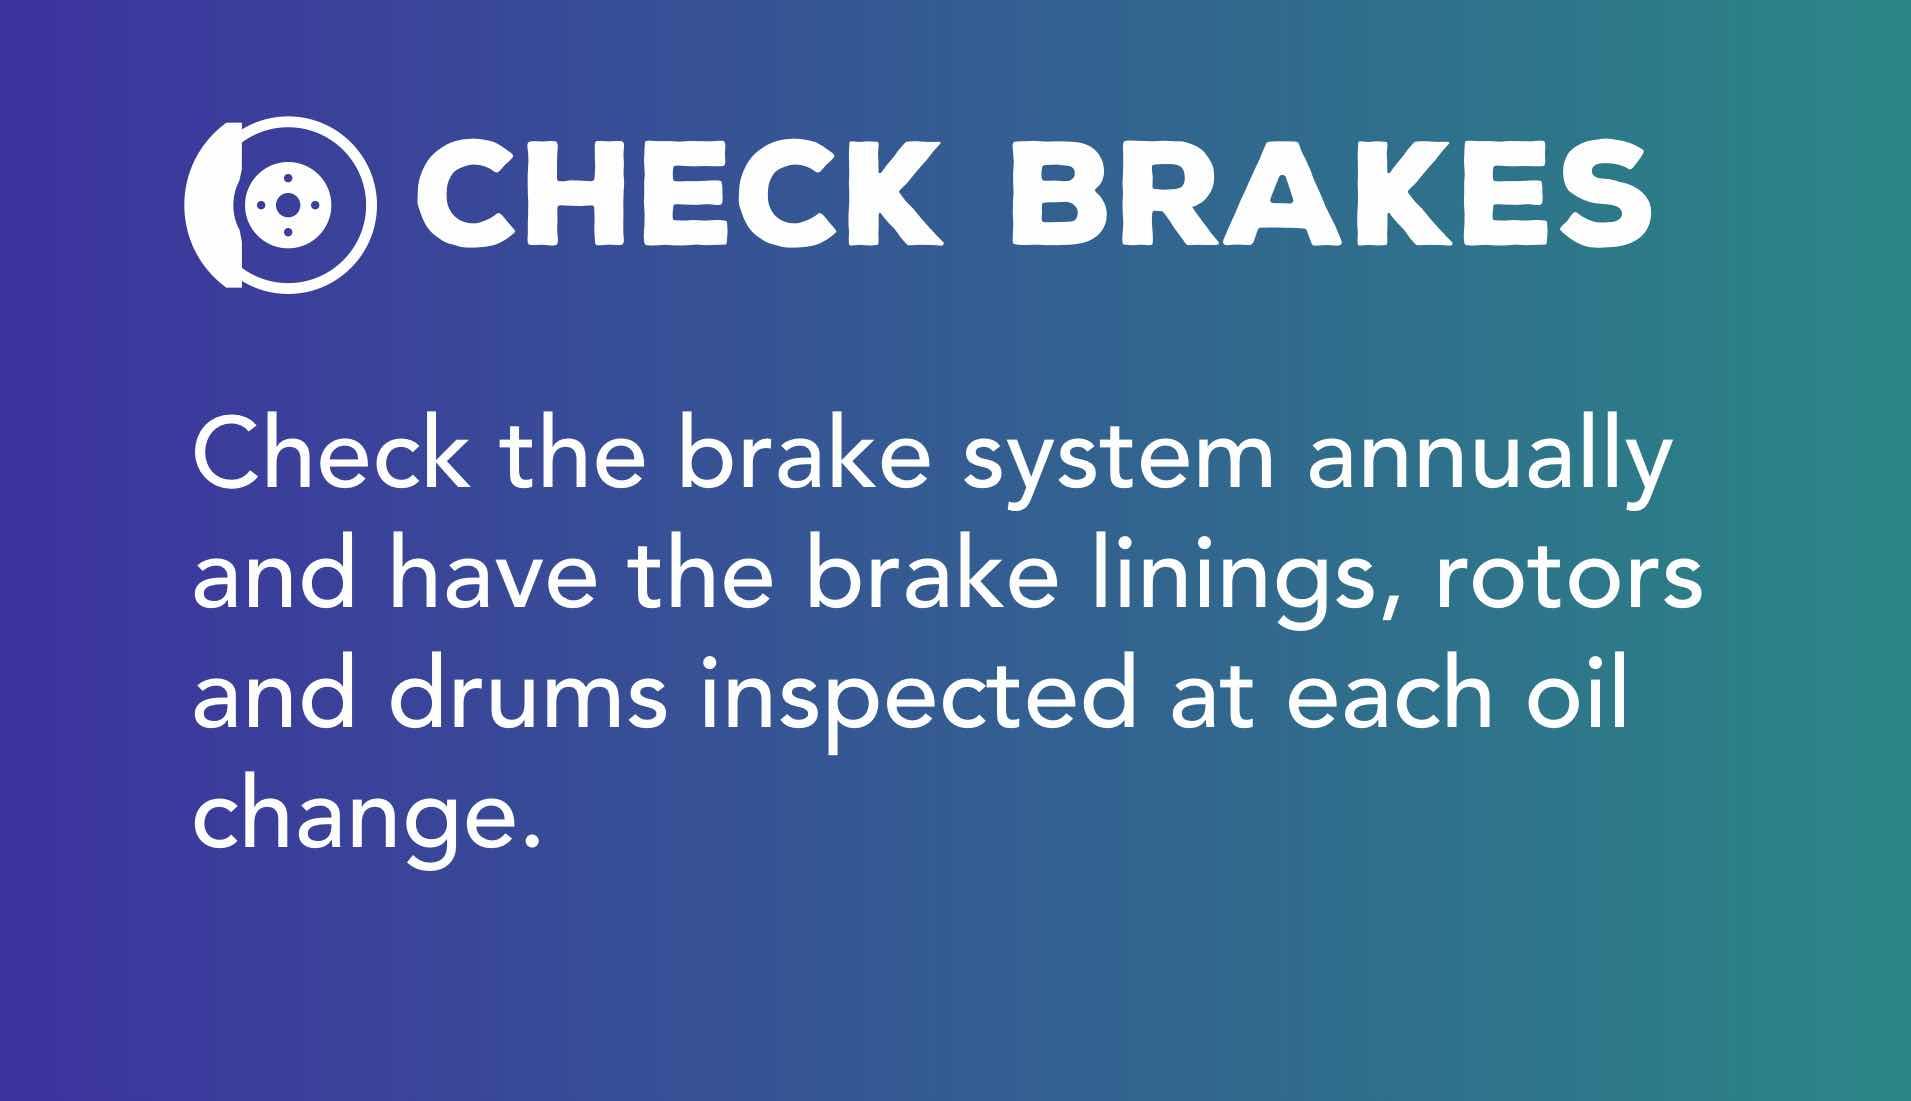 Check the brake system annually and have the brake linings, rotors and drums inspected at each oil change.